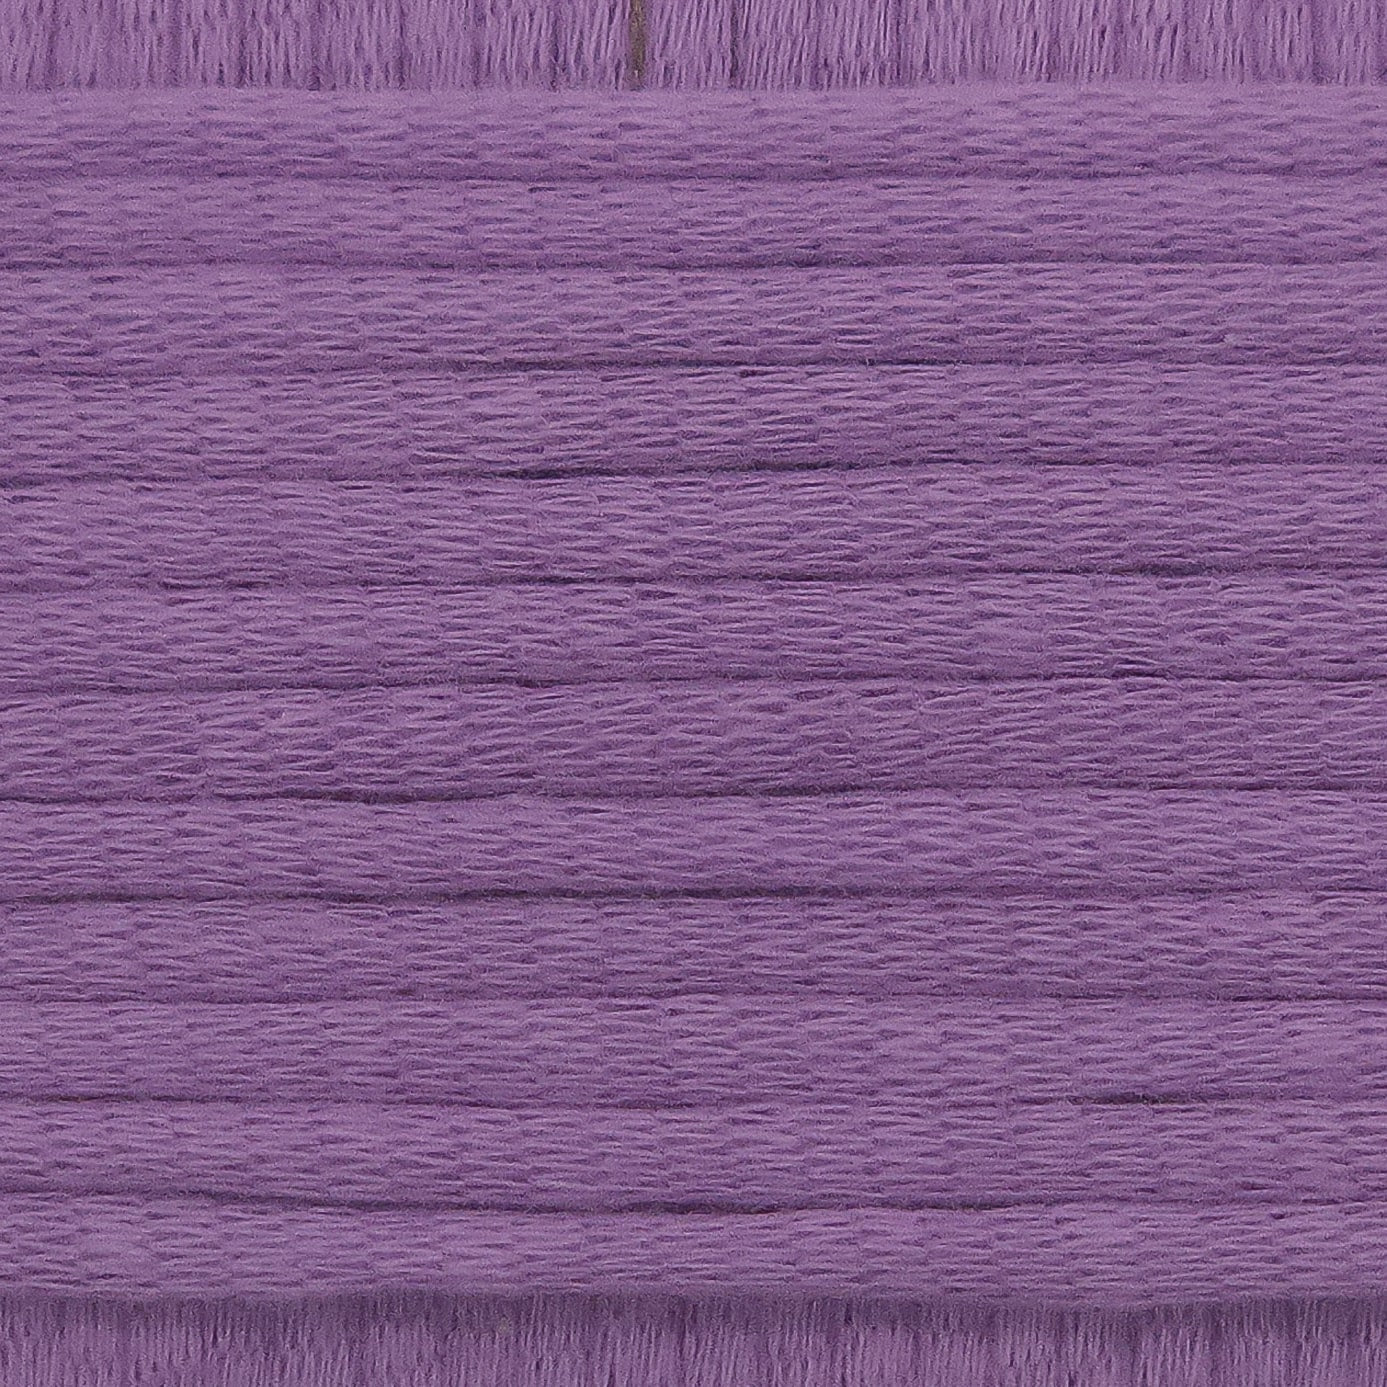 The Squishy Pals | Pearly Purple Yarn for Crochet Beginners